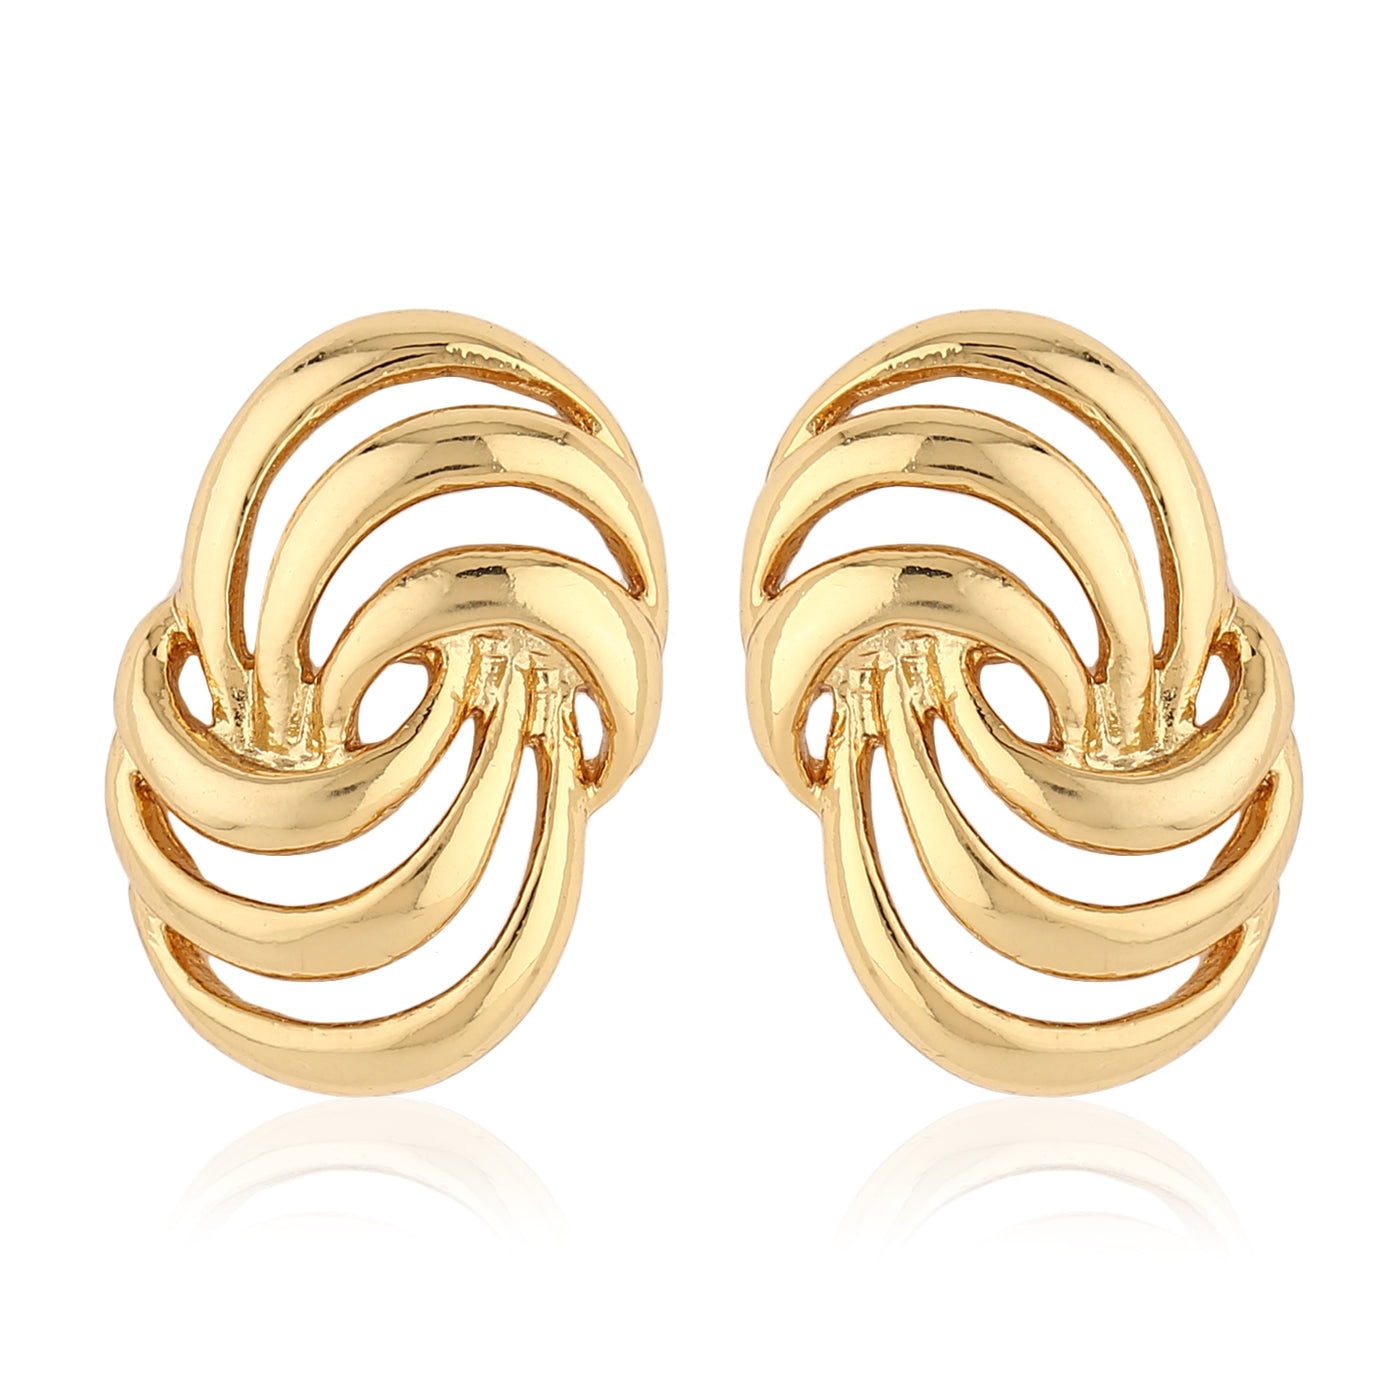 24 Kt Gold Plated Earrings Combo